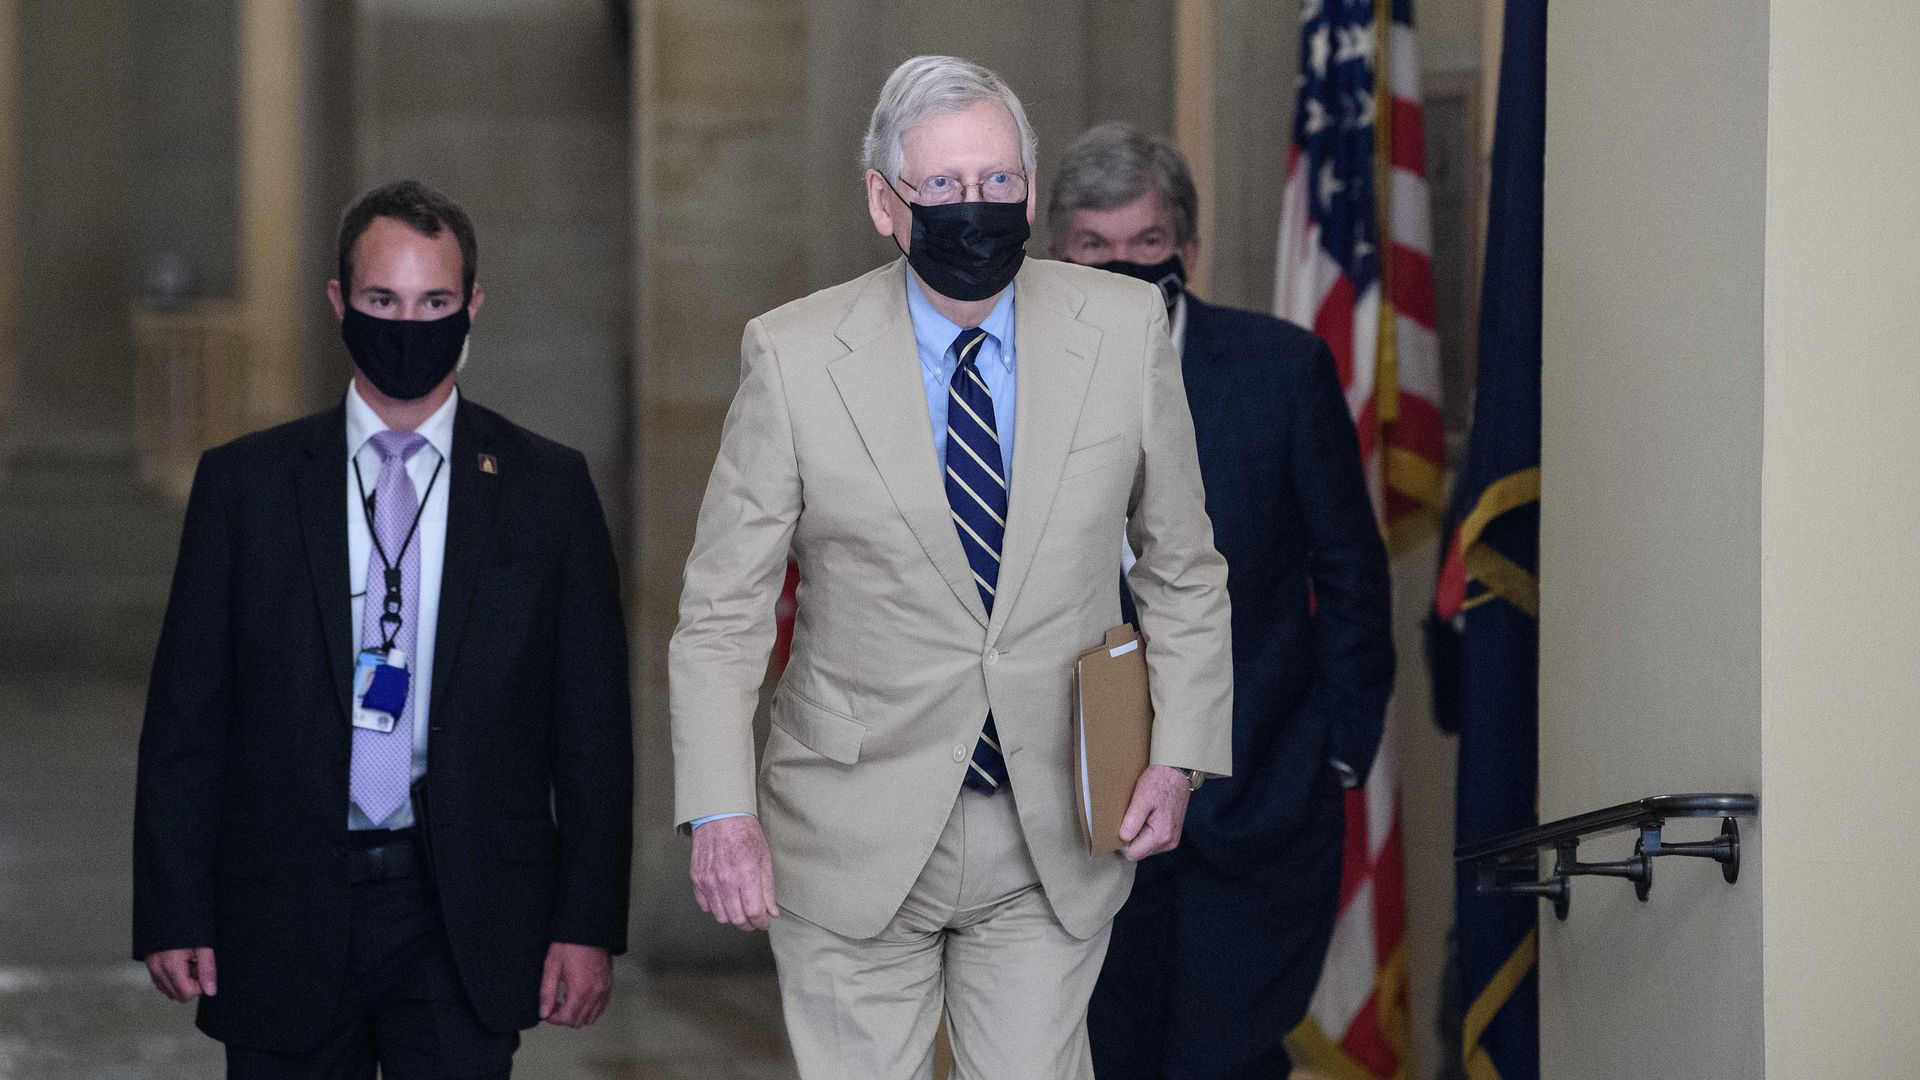 Mitch McConnell wears a tan suit as he walks through Congress with two men in black suits behind him